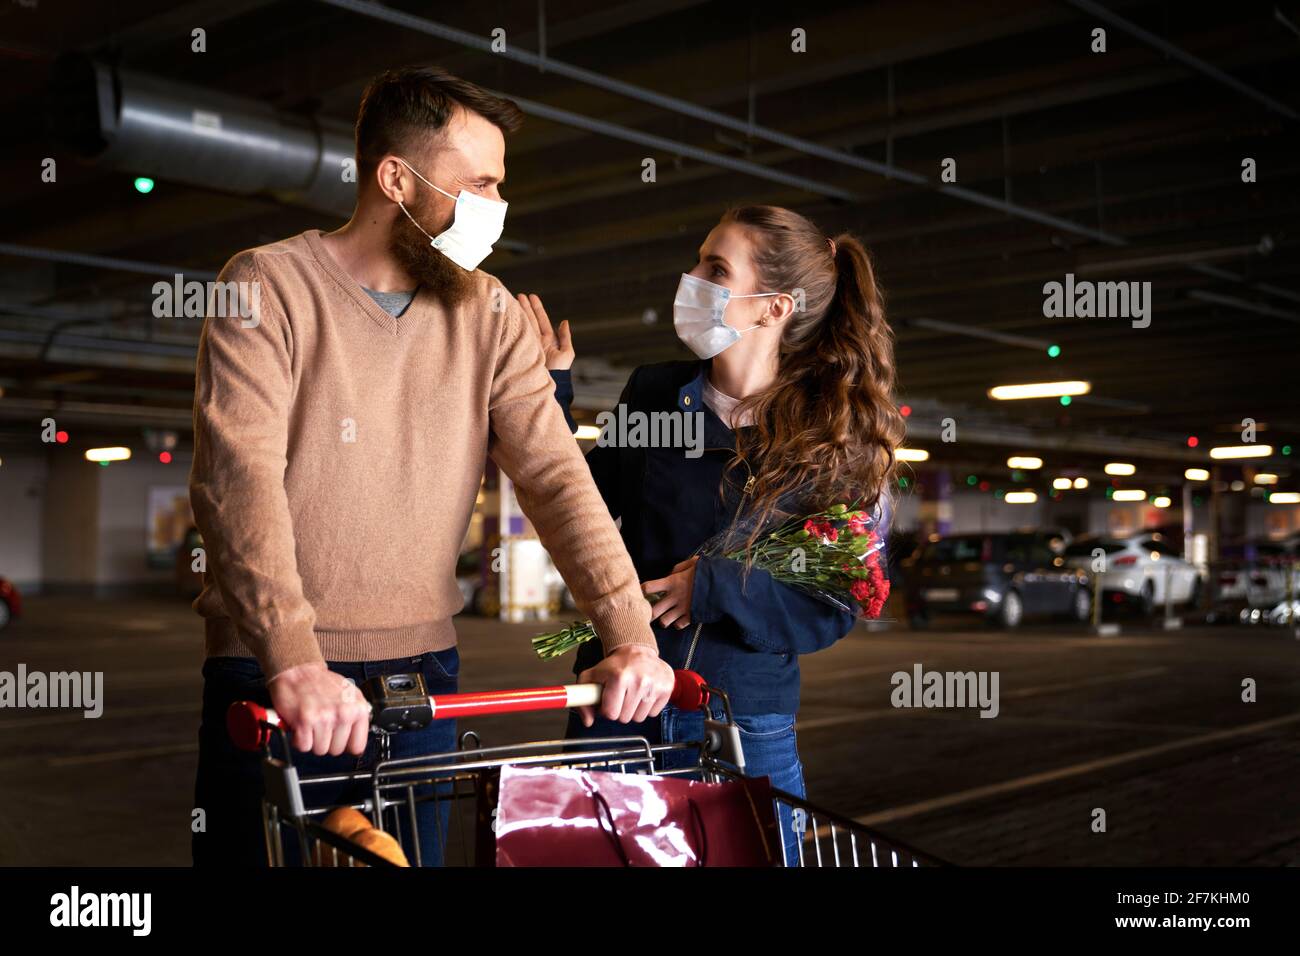 Couple walking with shopping cart after shopping Stock Photo